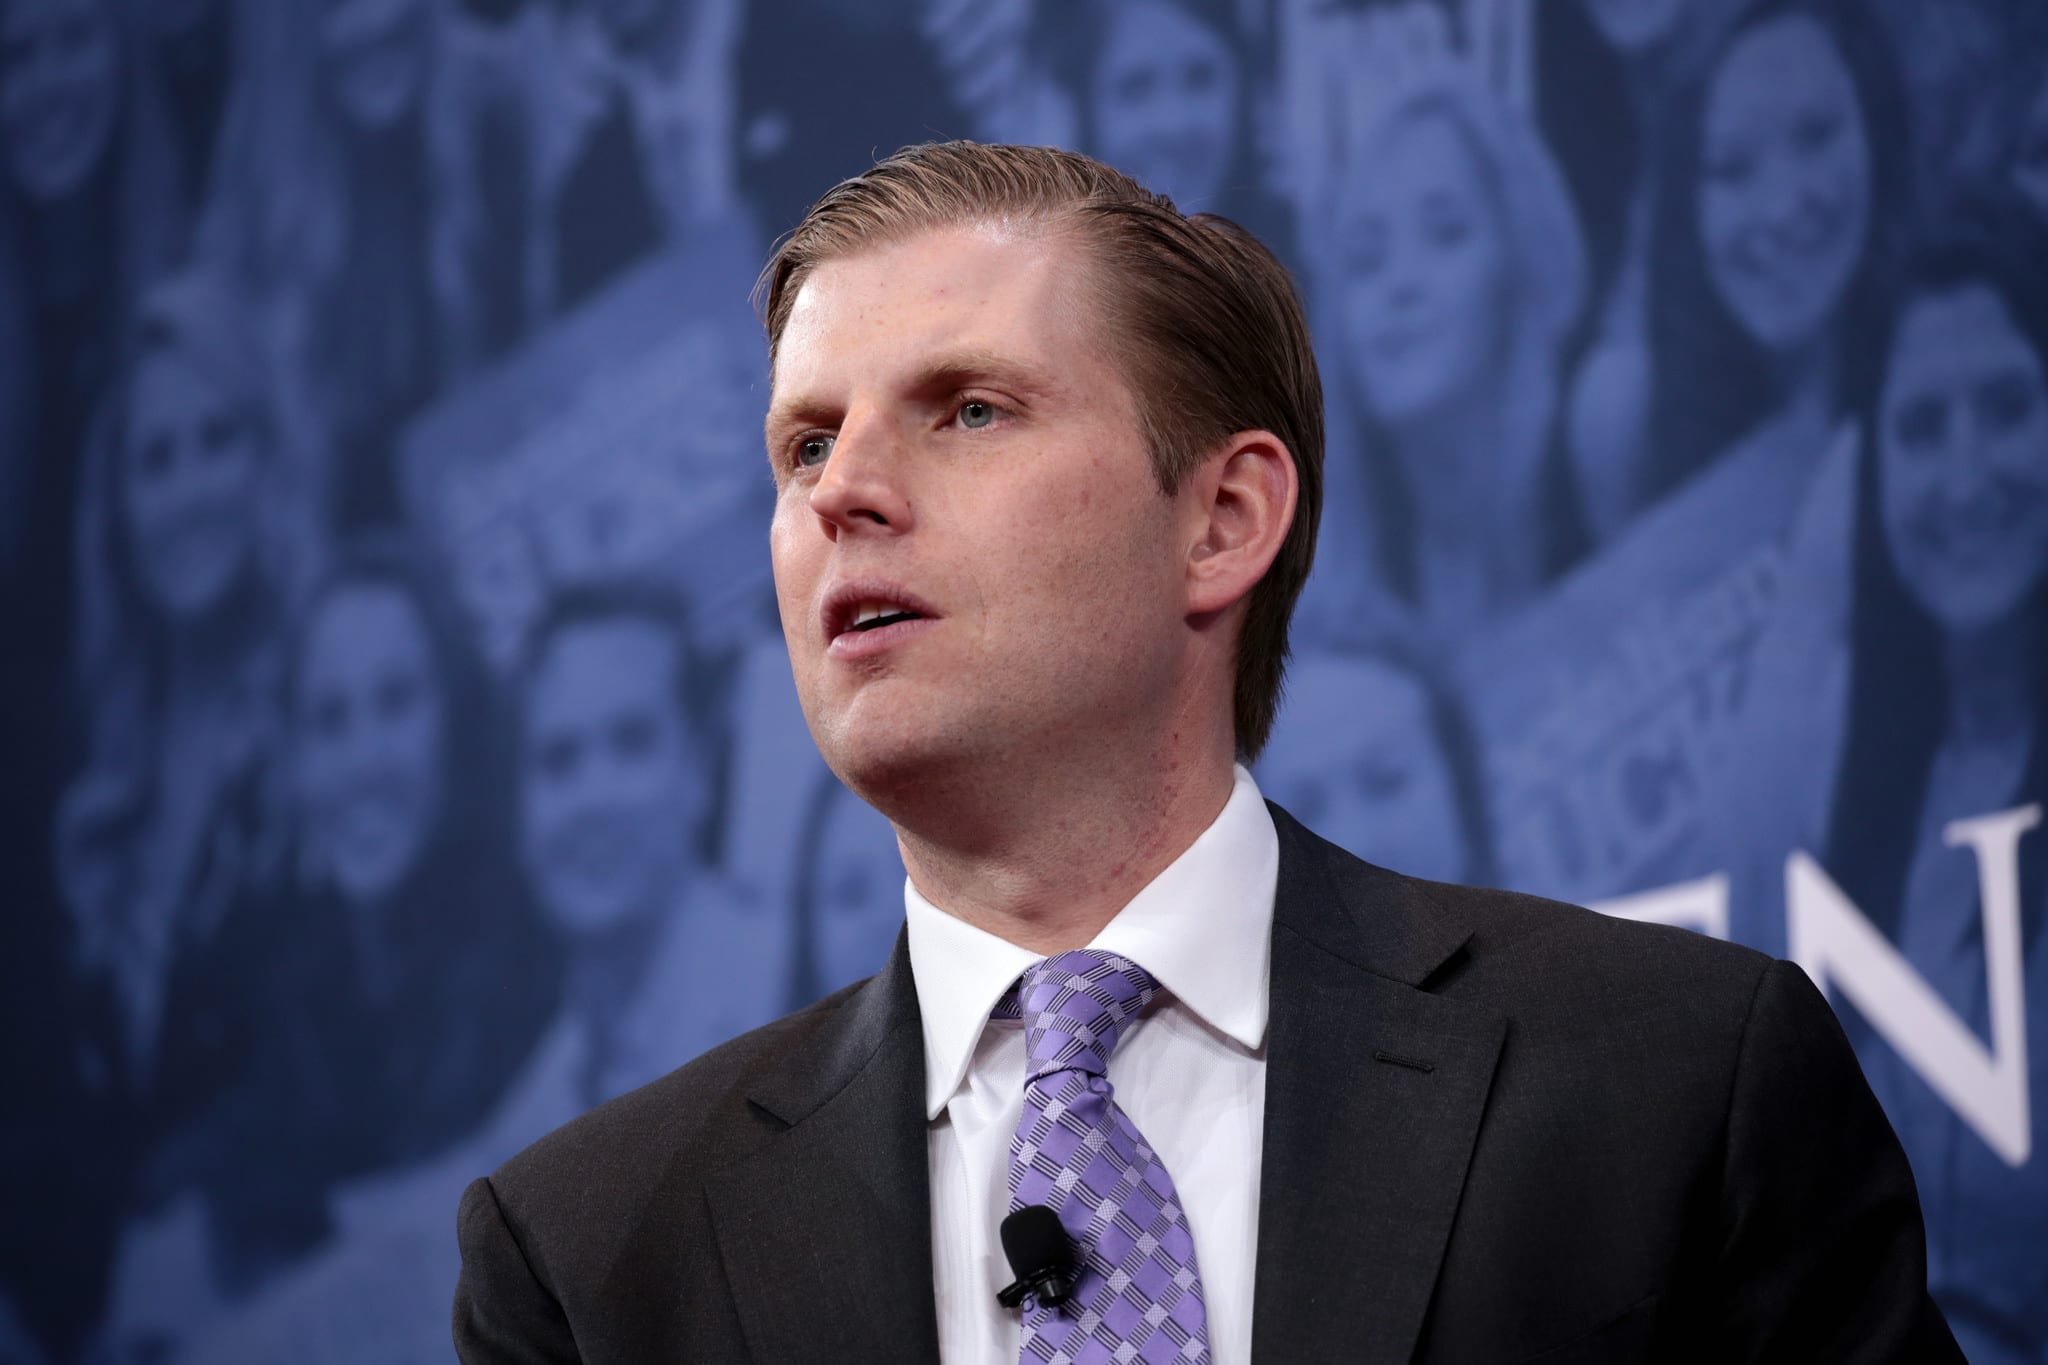 Eric Trump; image courtesy of Gage Skidmore, via Flickr, CC BY-SA 2.0, no changes made.